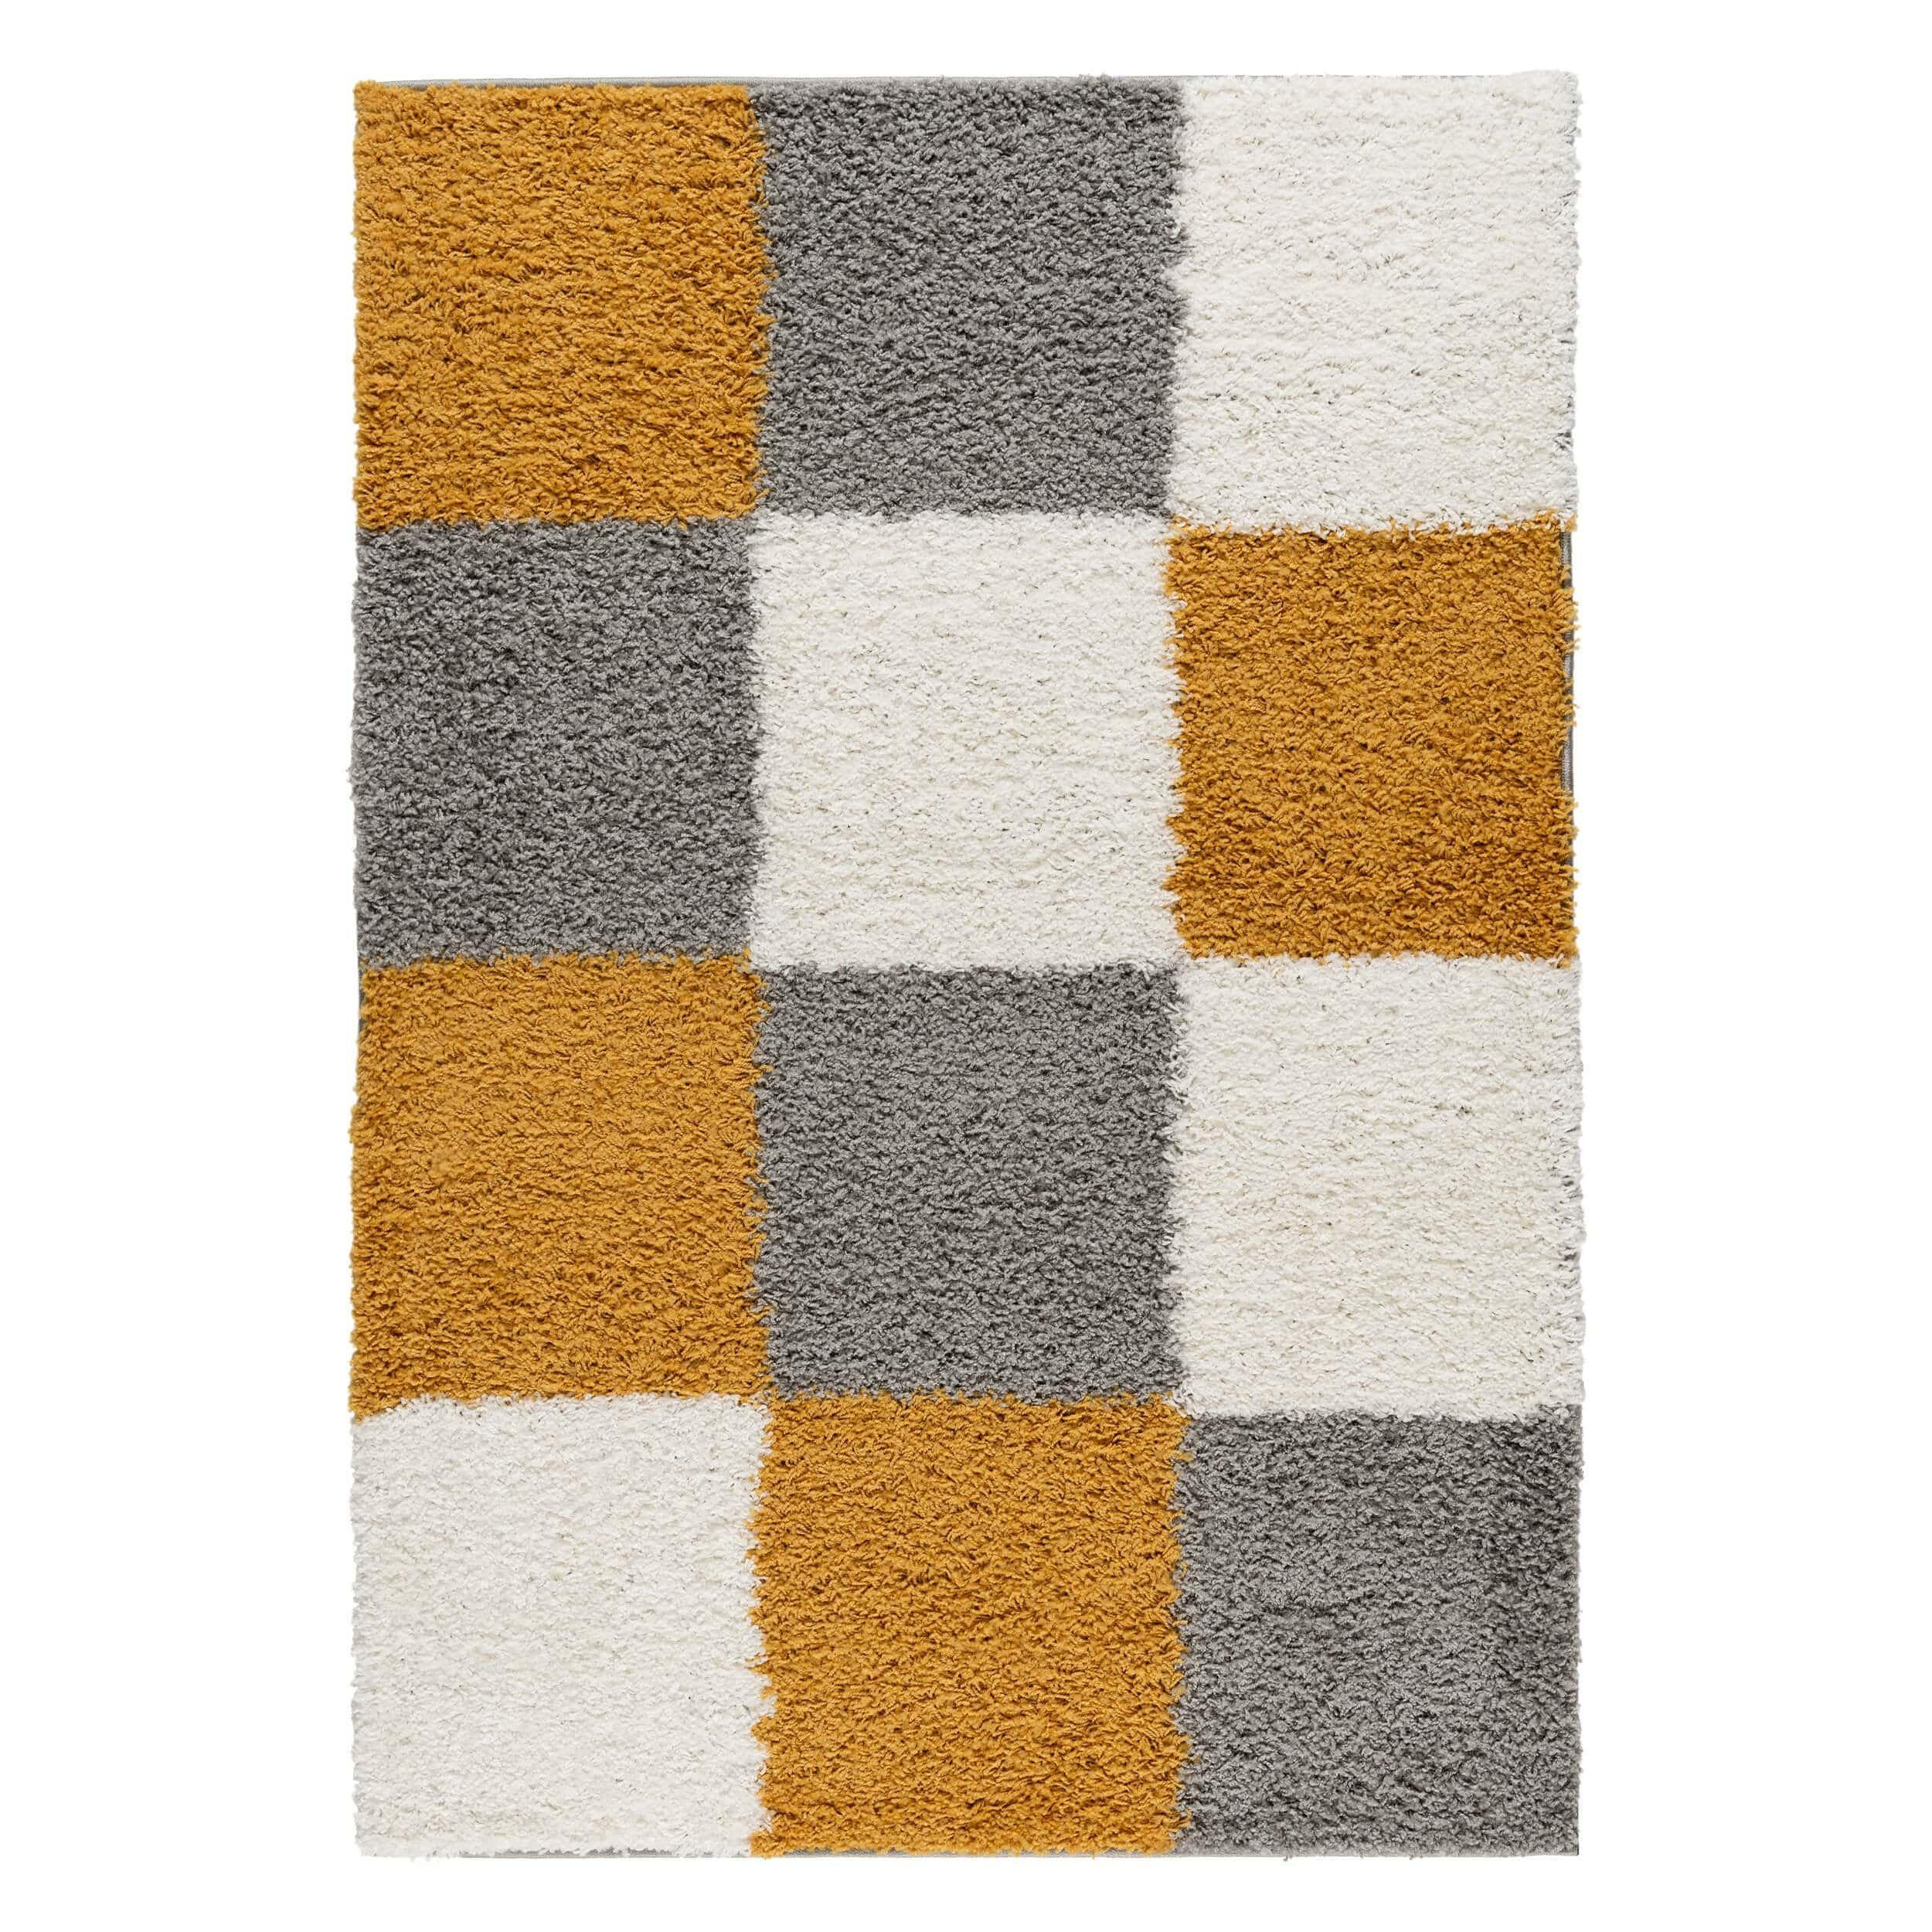 Shaggy Collection Shaggy Rugs in Gold - 381g - image 1